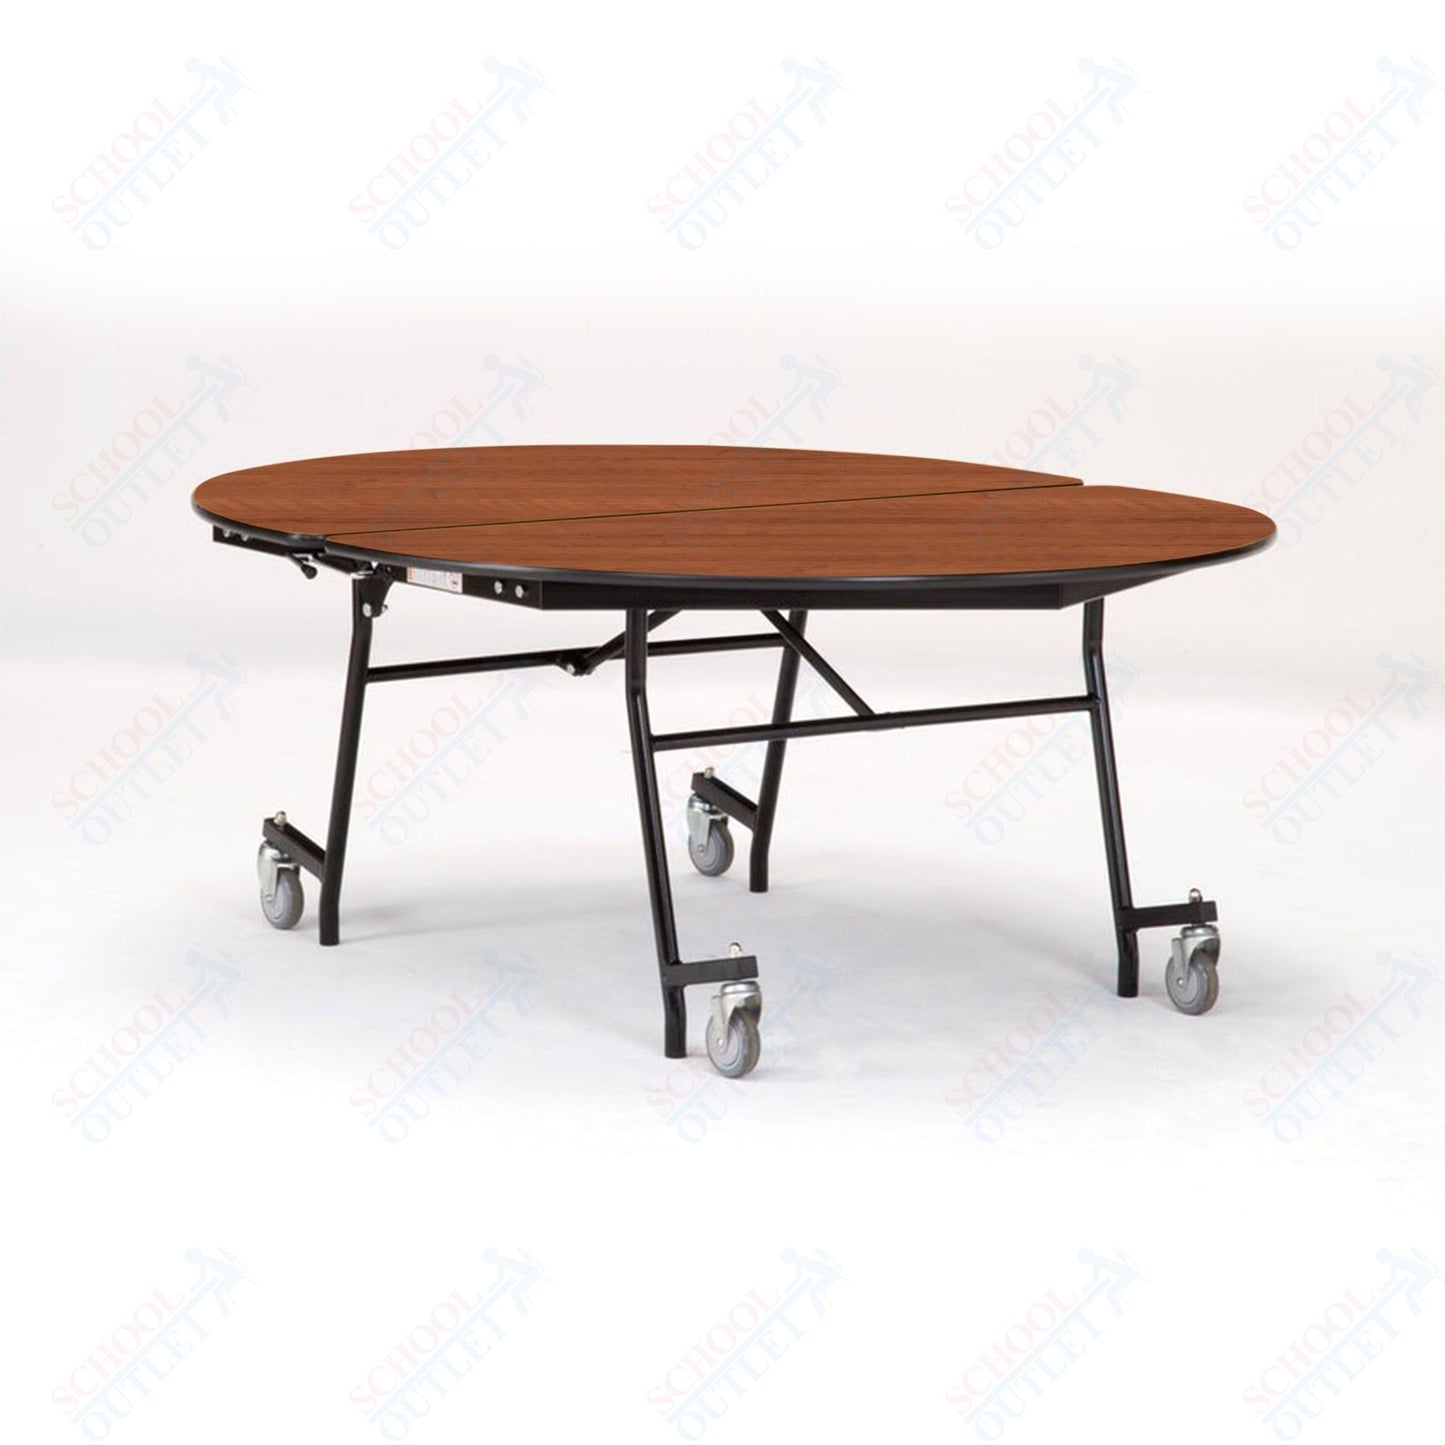 NPS Mobile Cafeteria Oval Table Shape Unit - 72" L x 60" W (National Public Seating NPS-MT72V)